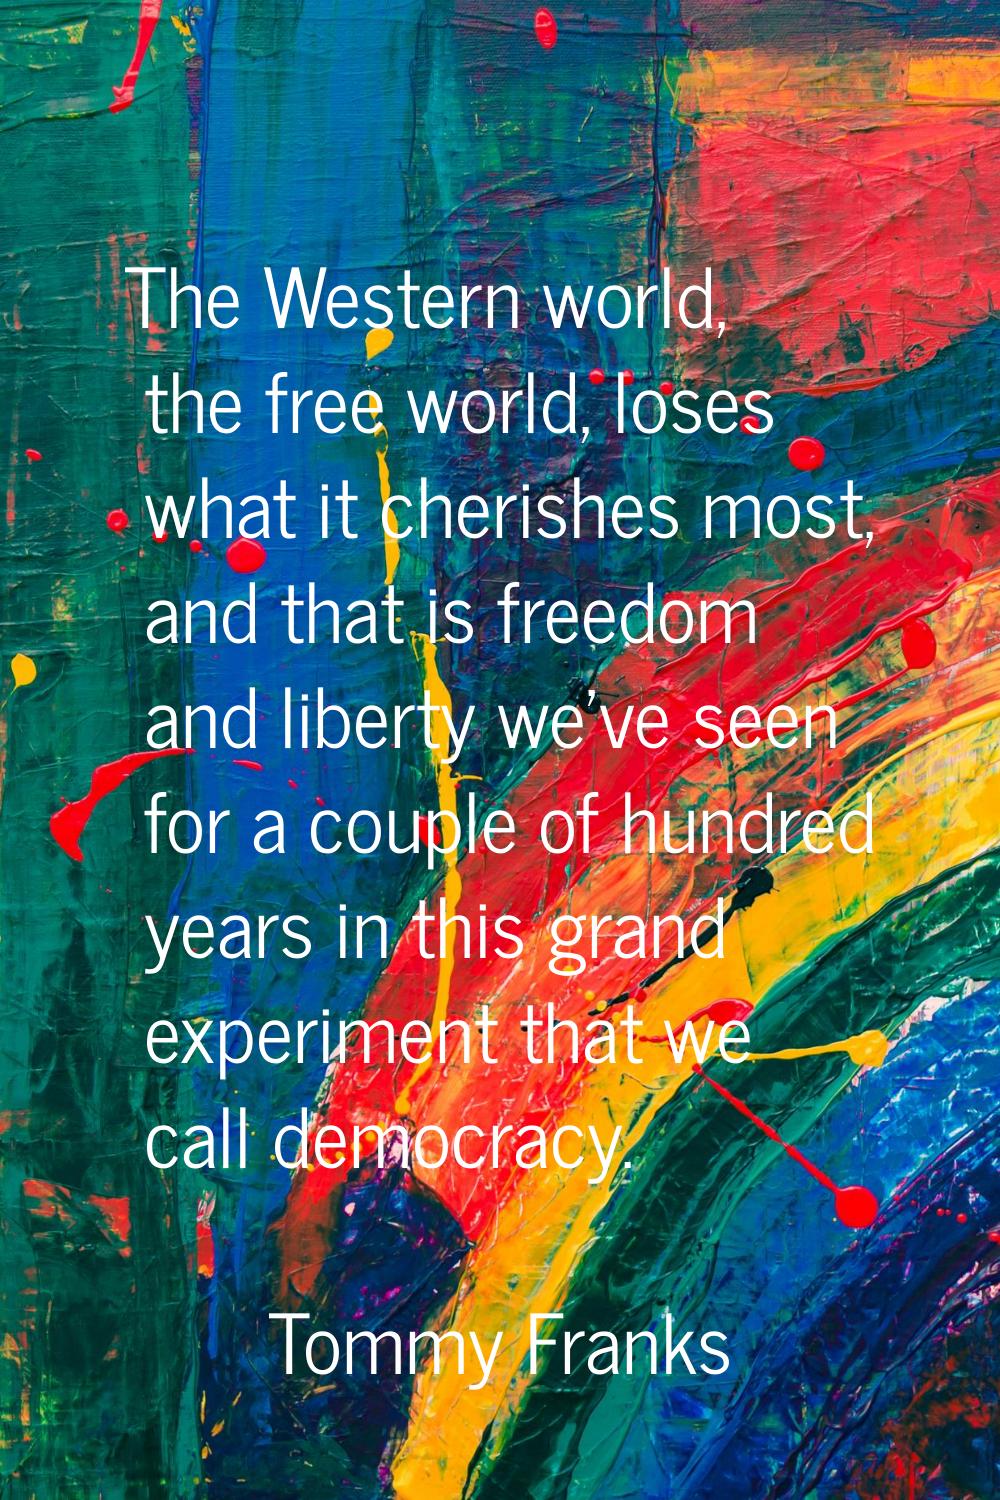 The Western world, the free world, loses what it cherishes most, and that is freedom and liberty we